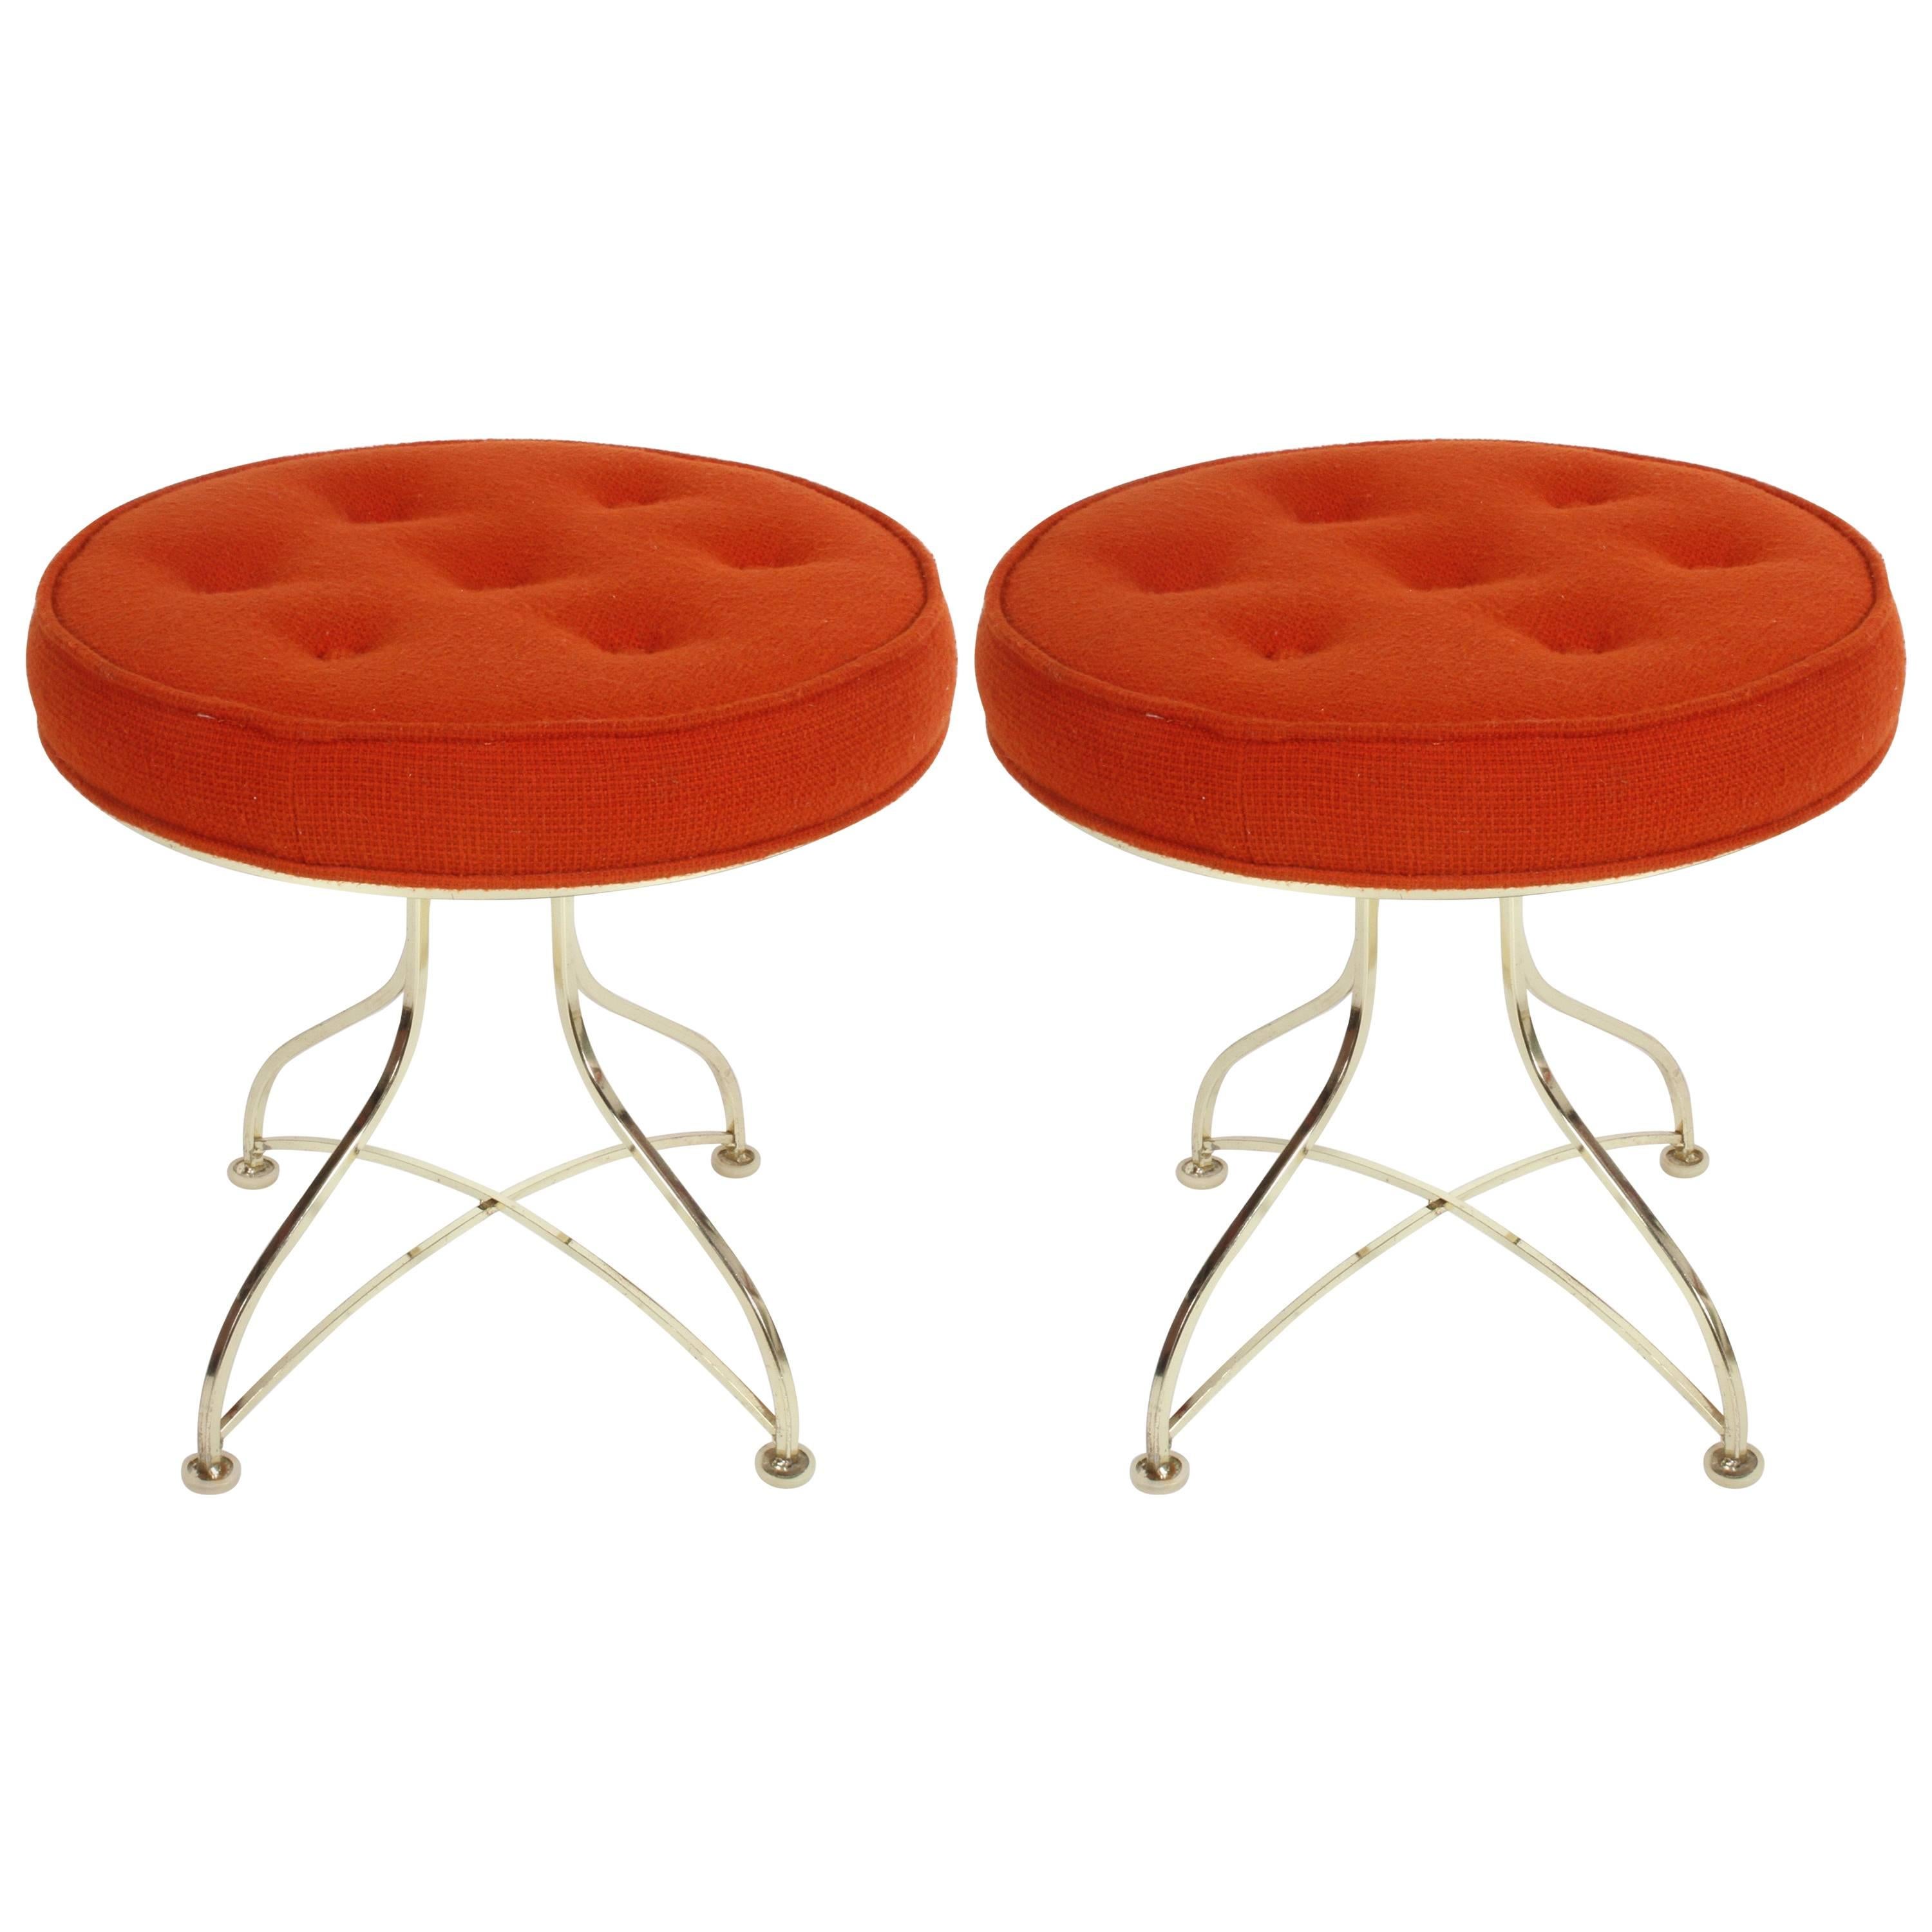 Pair of Hollywood Regency Round Tufted Brass Base Stools